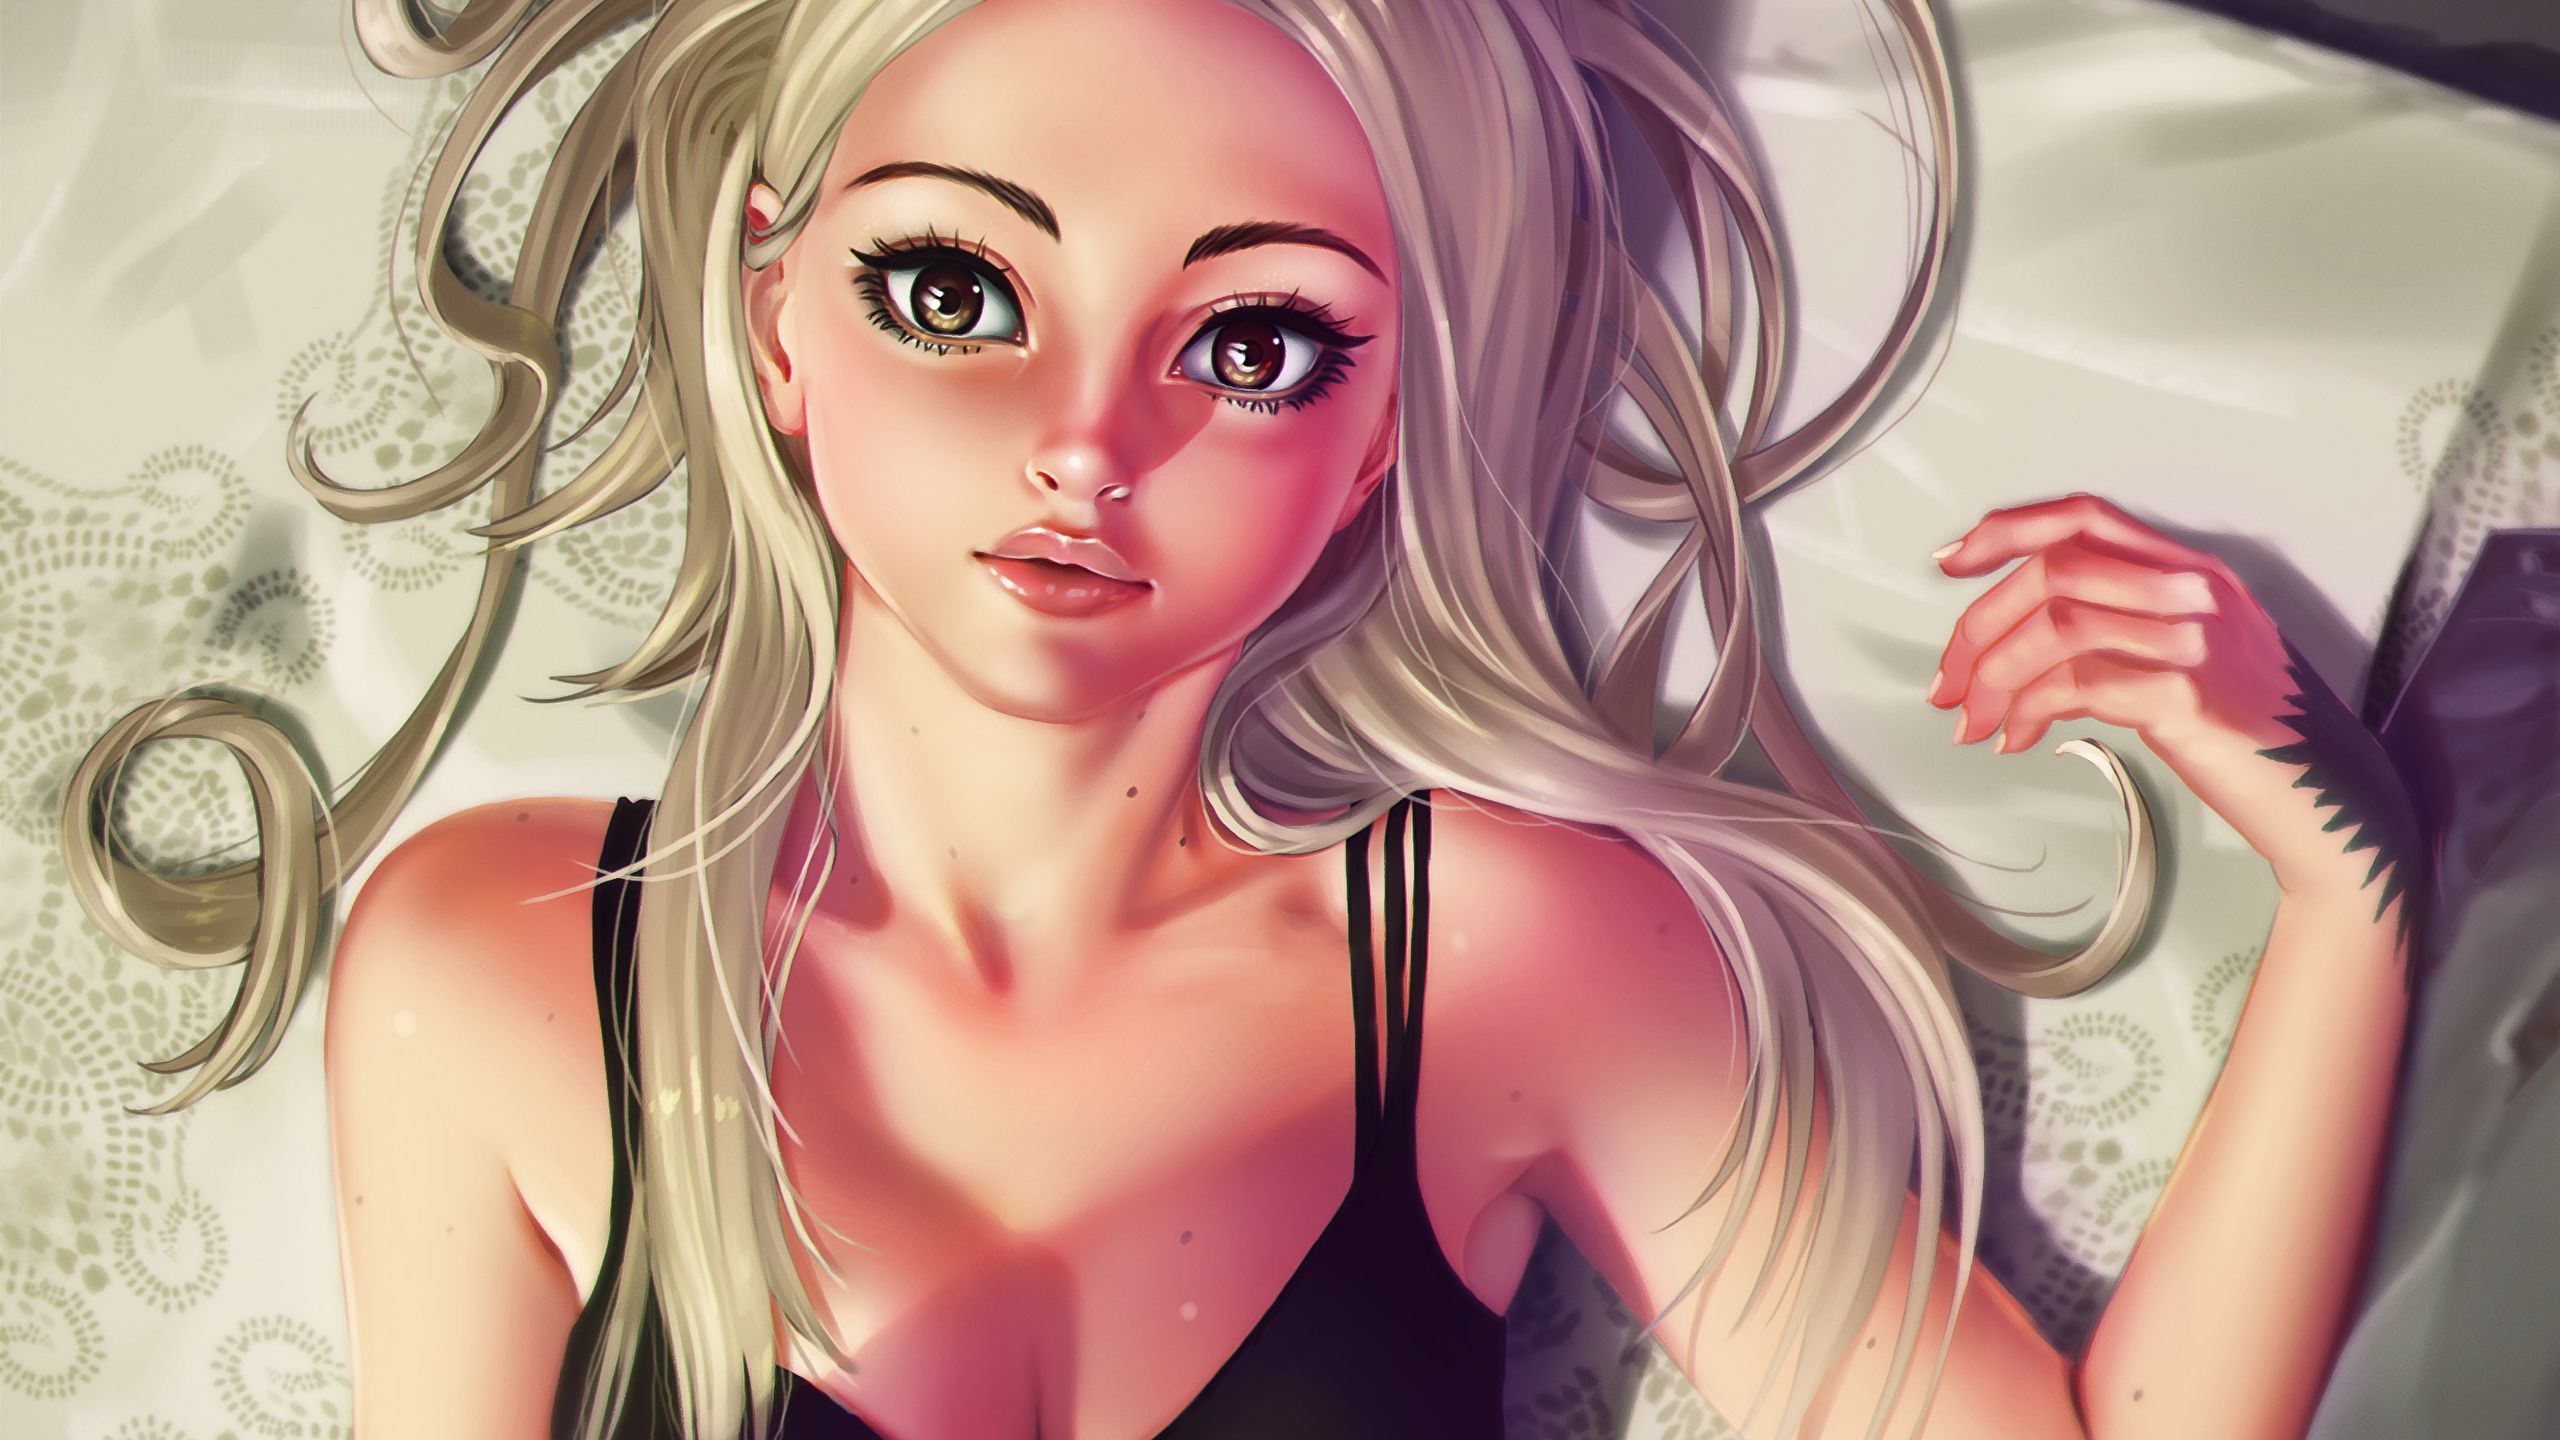 Picture Blonde girl Selfie Girls Glance Painting Art 2560x1440